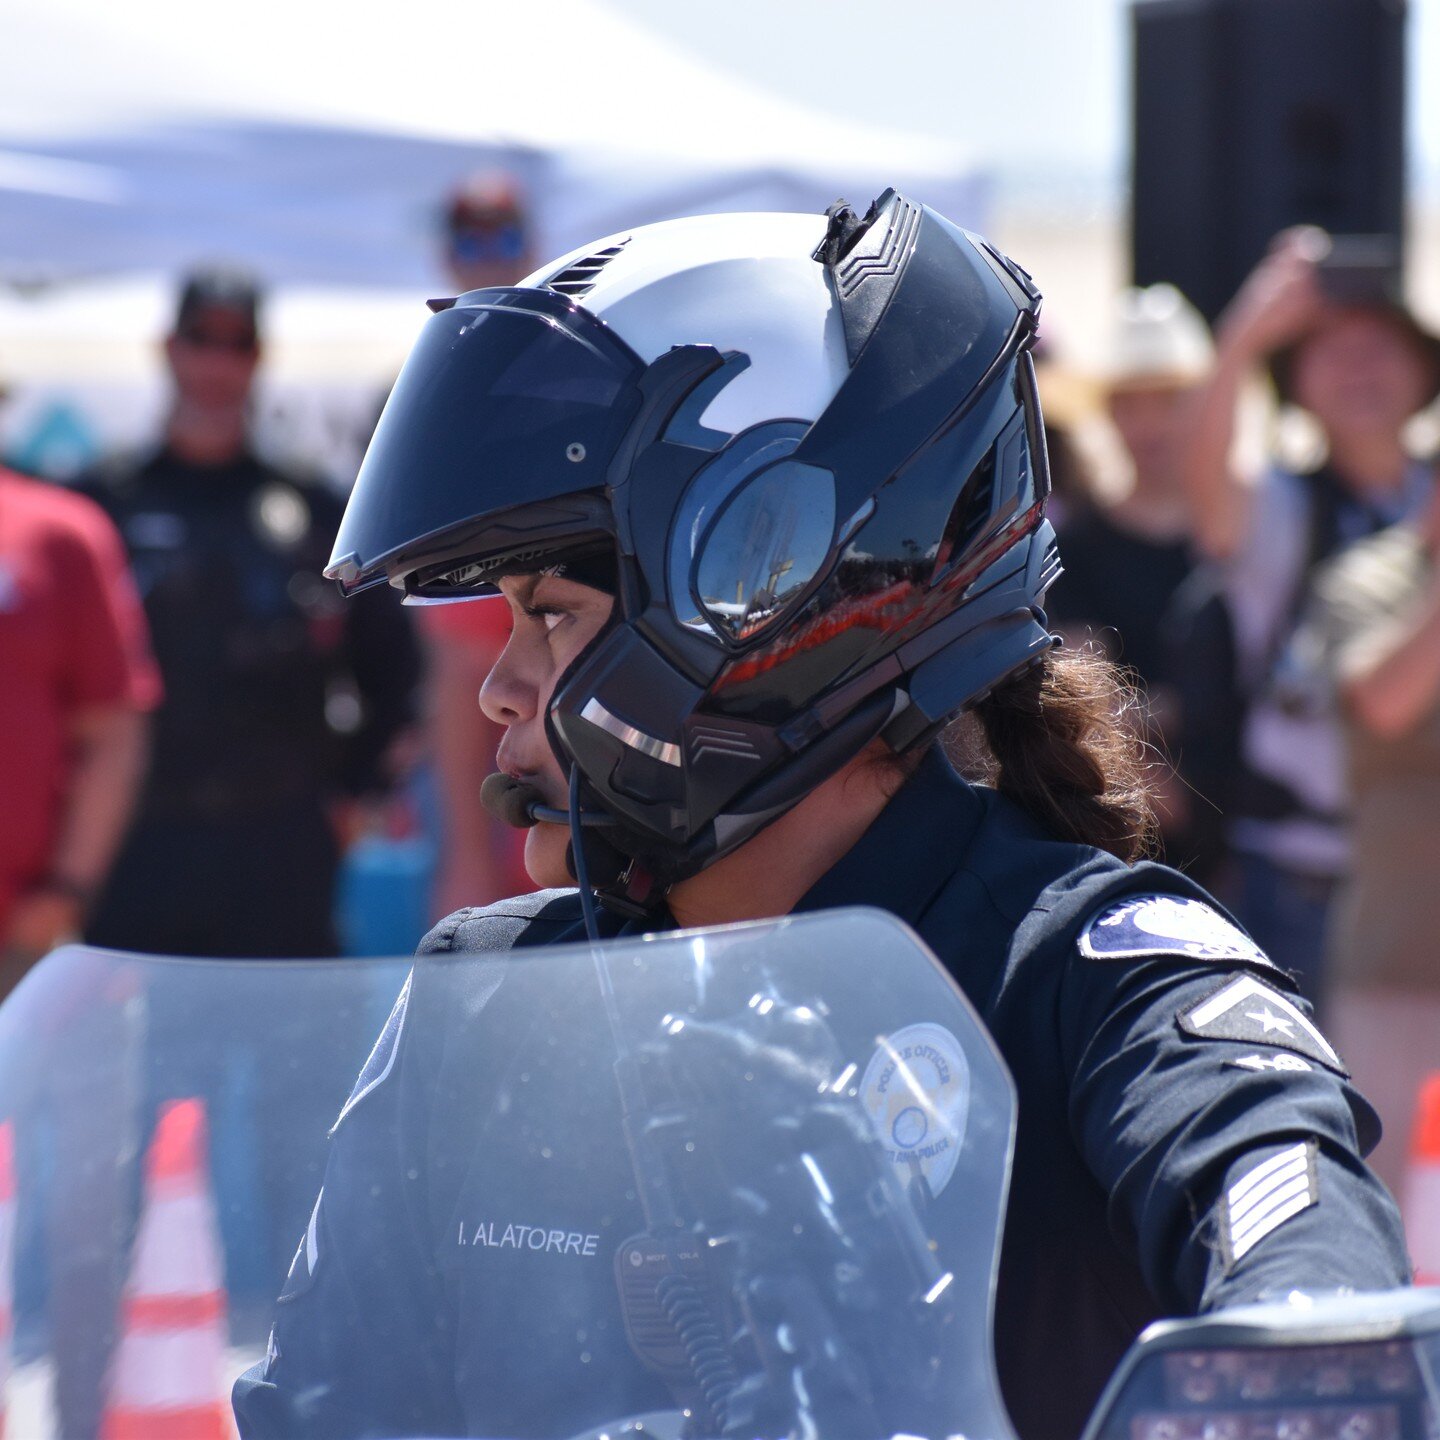 An impressive day at the OCTOA Motor Rodeo. Motor Officers from So-Cal showcased their skills with precision using PVP equipment. 

#PVPCommunications #MotorOfficers #OCTOA #OCTOAMotorRodeo